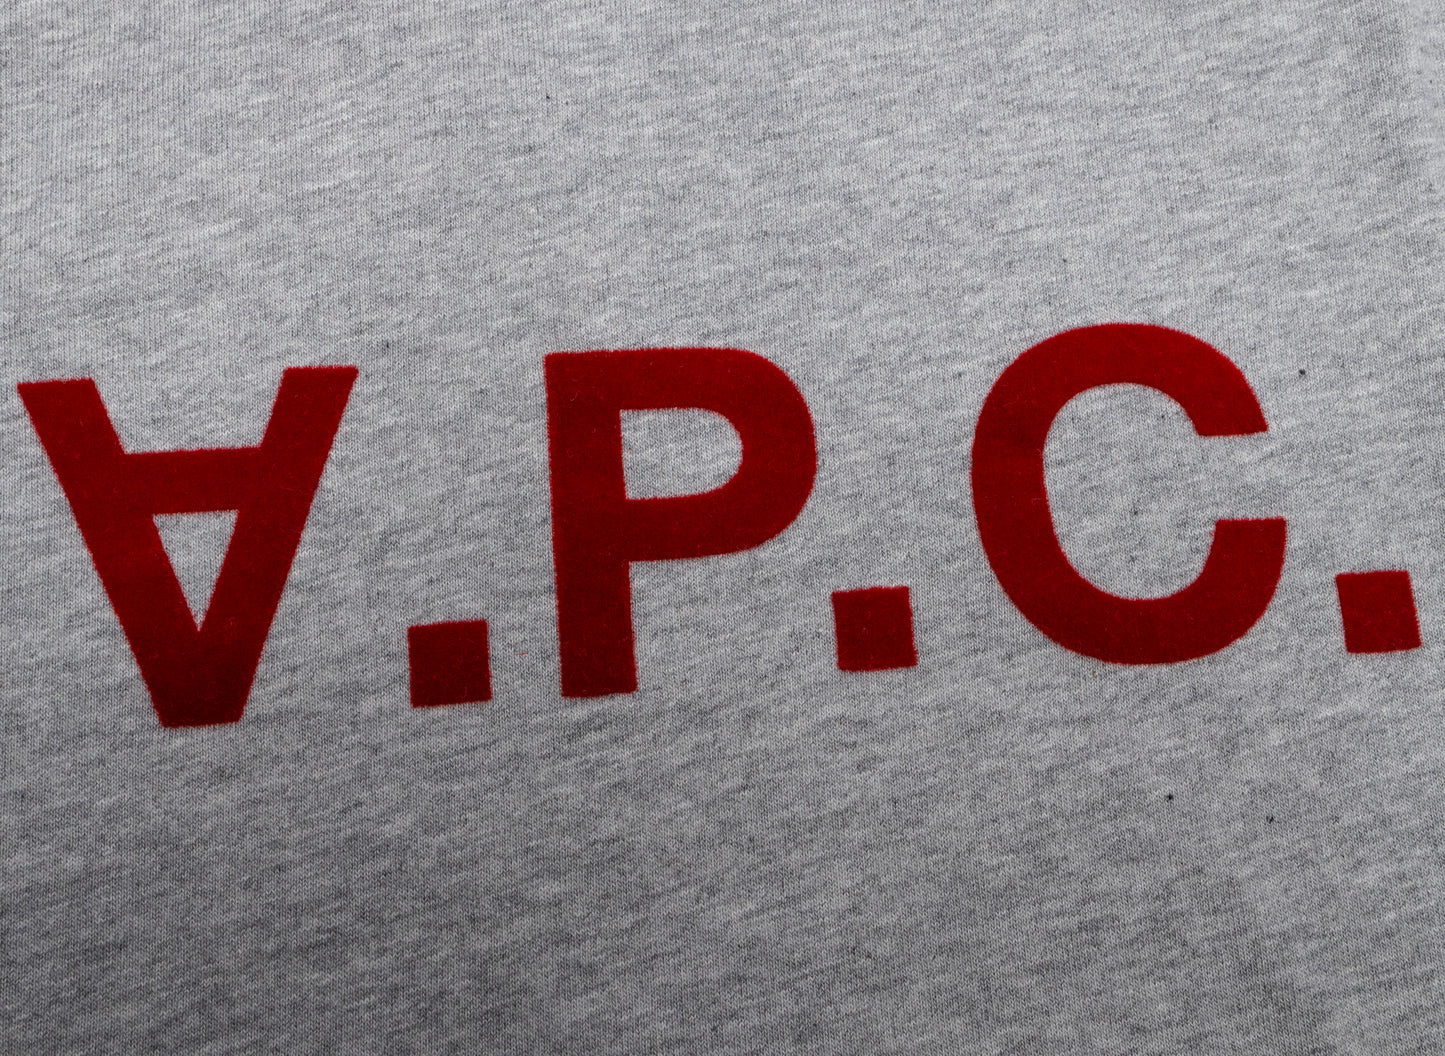 A.P.C. VPC Color H T-Shirt in Grey/Red